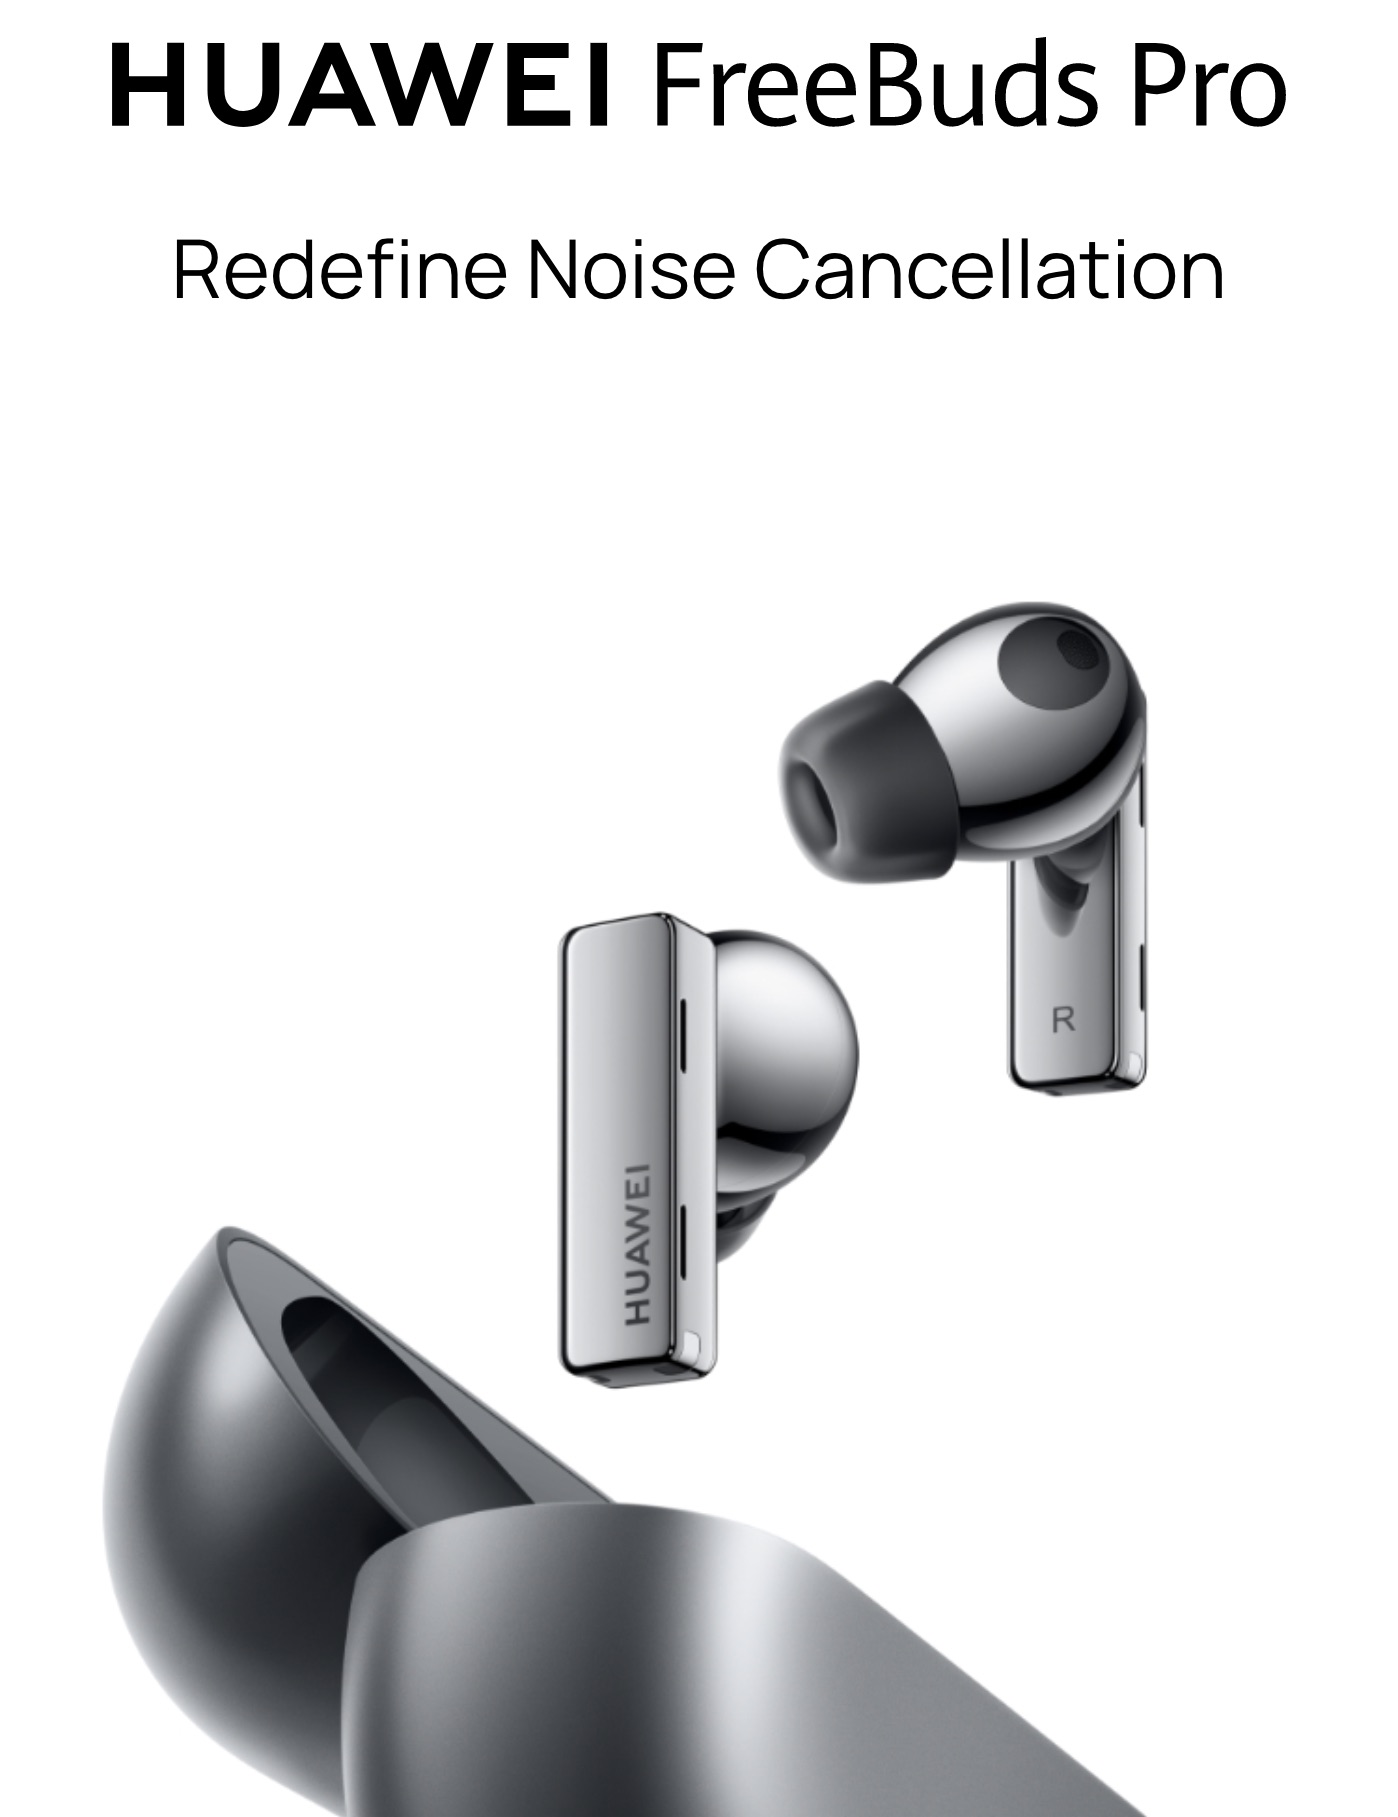 Huawei-FreeBuds-Pro-Active-Noise-Cancelling-True-Wireless-Earbuds-Description-1